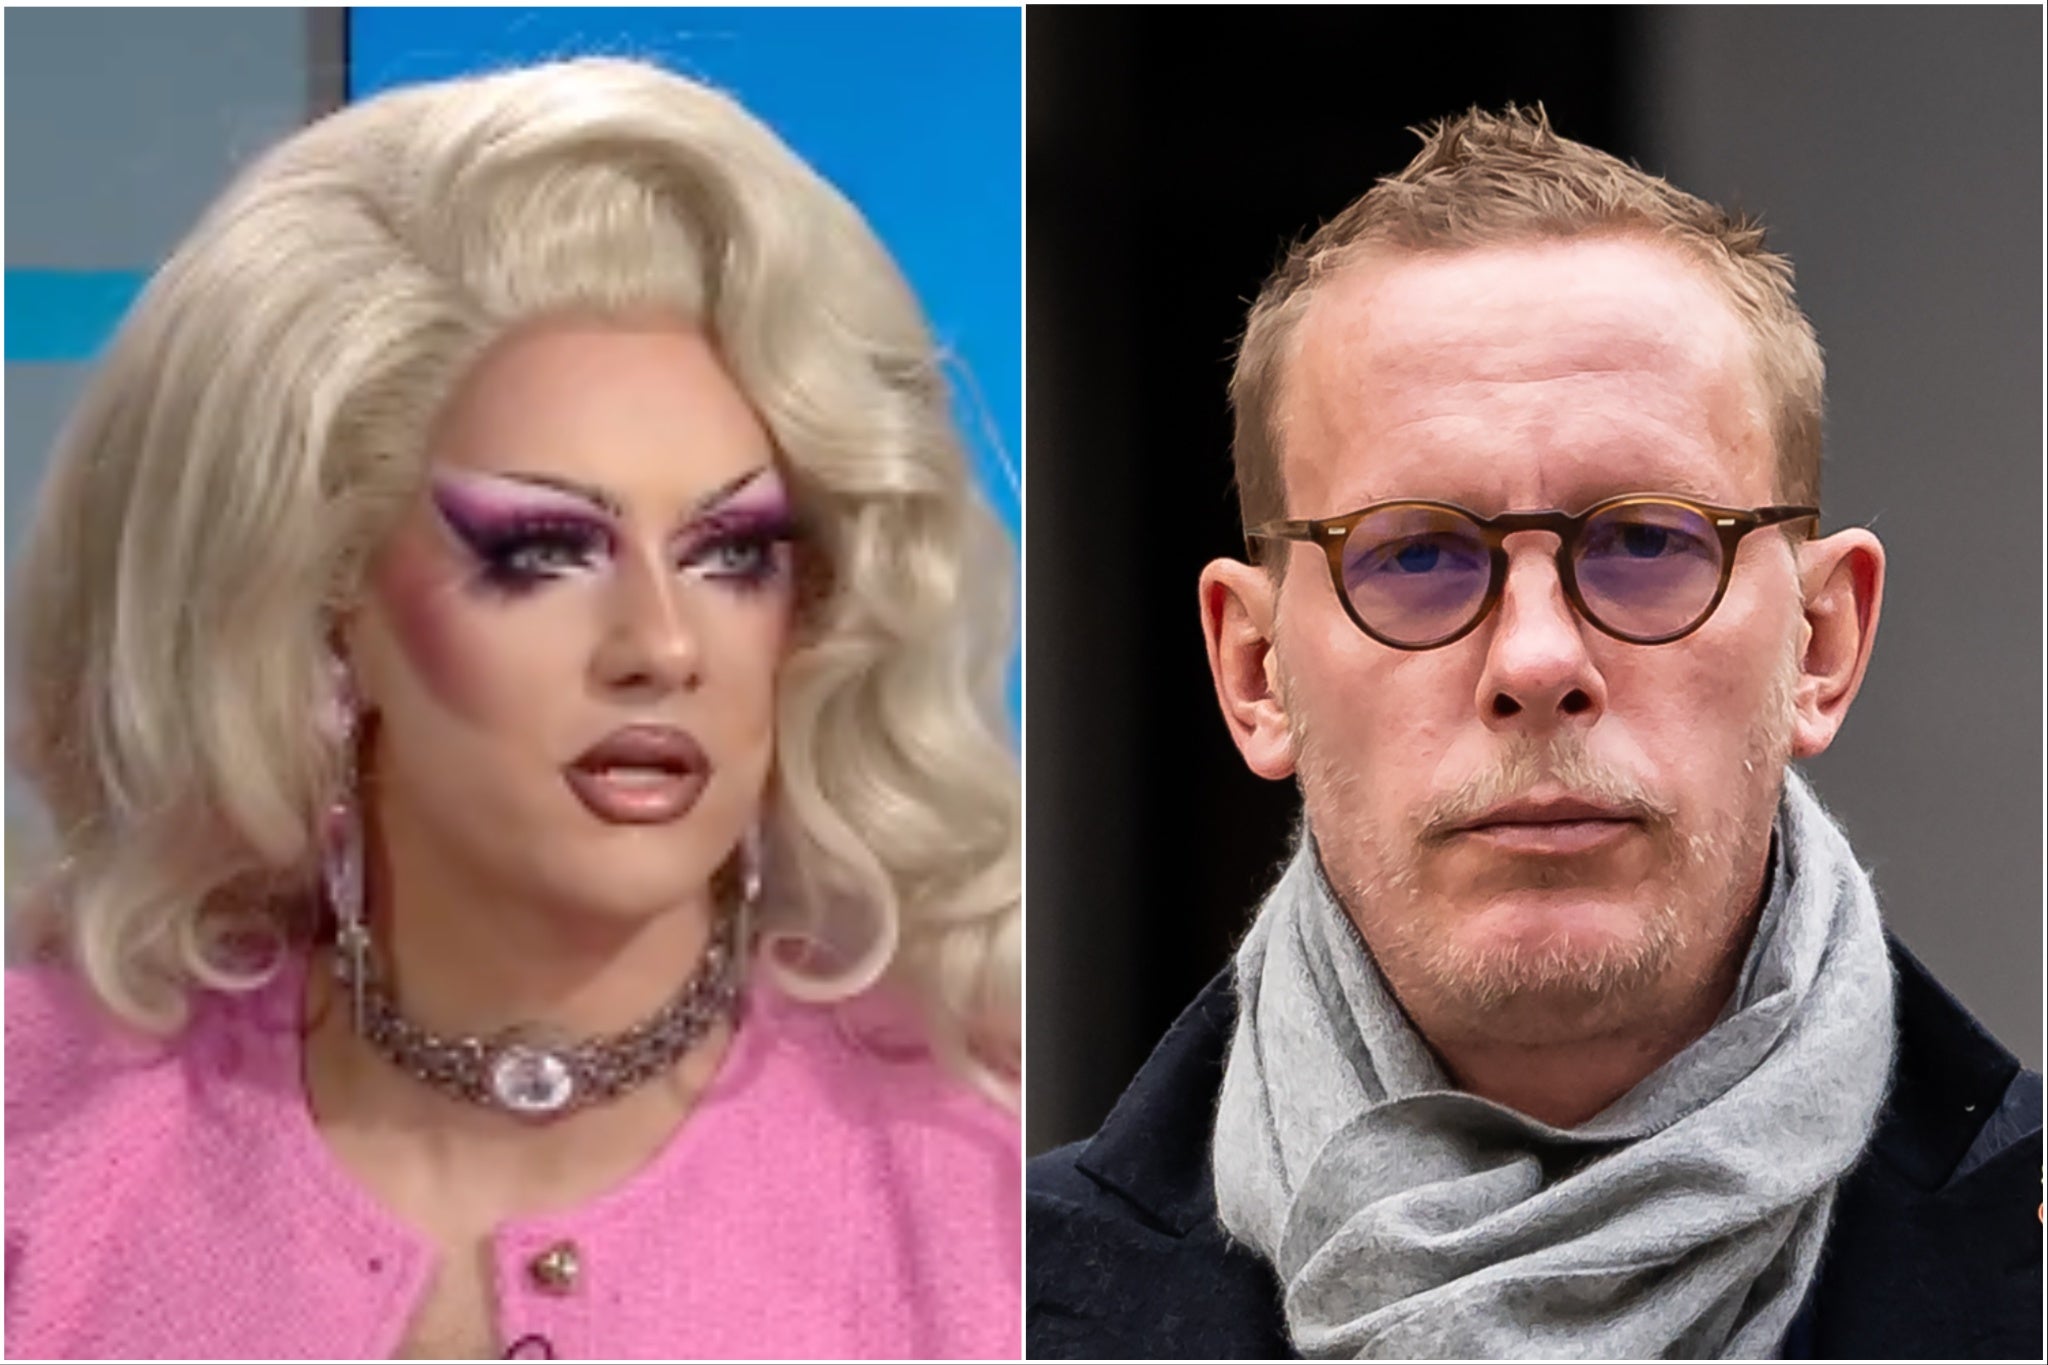 The actor-turned-politician was successfully sued by former Stonewall trustee Simon Blake and drag artist Crystal over libel on Twitter/X.